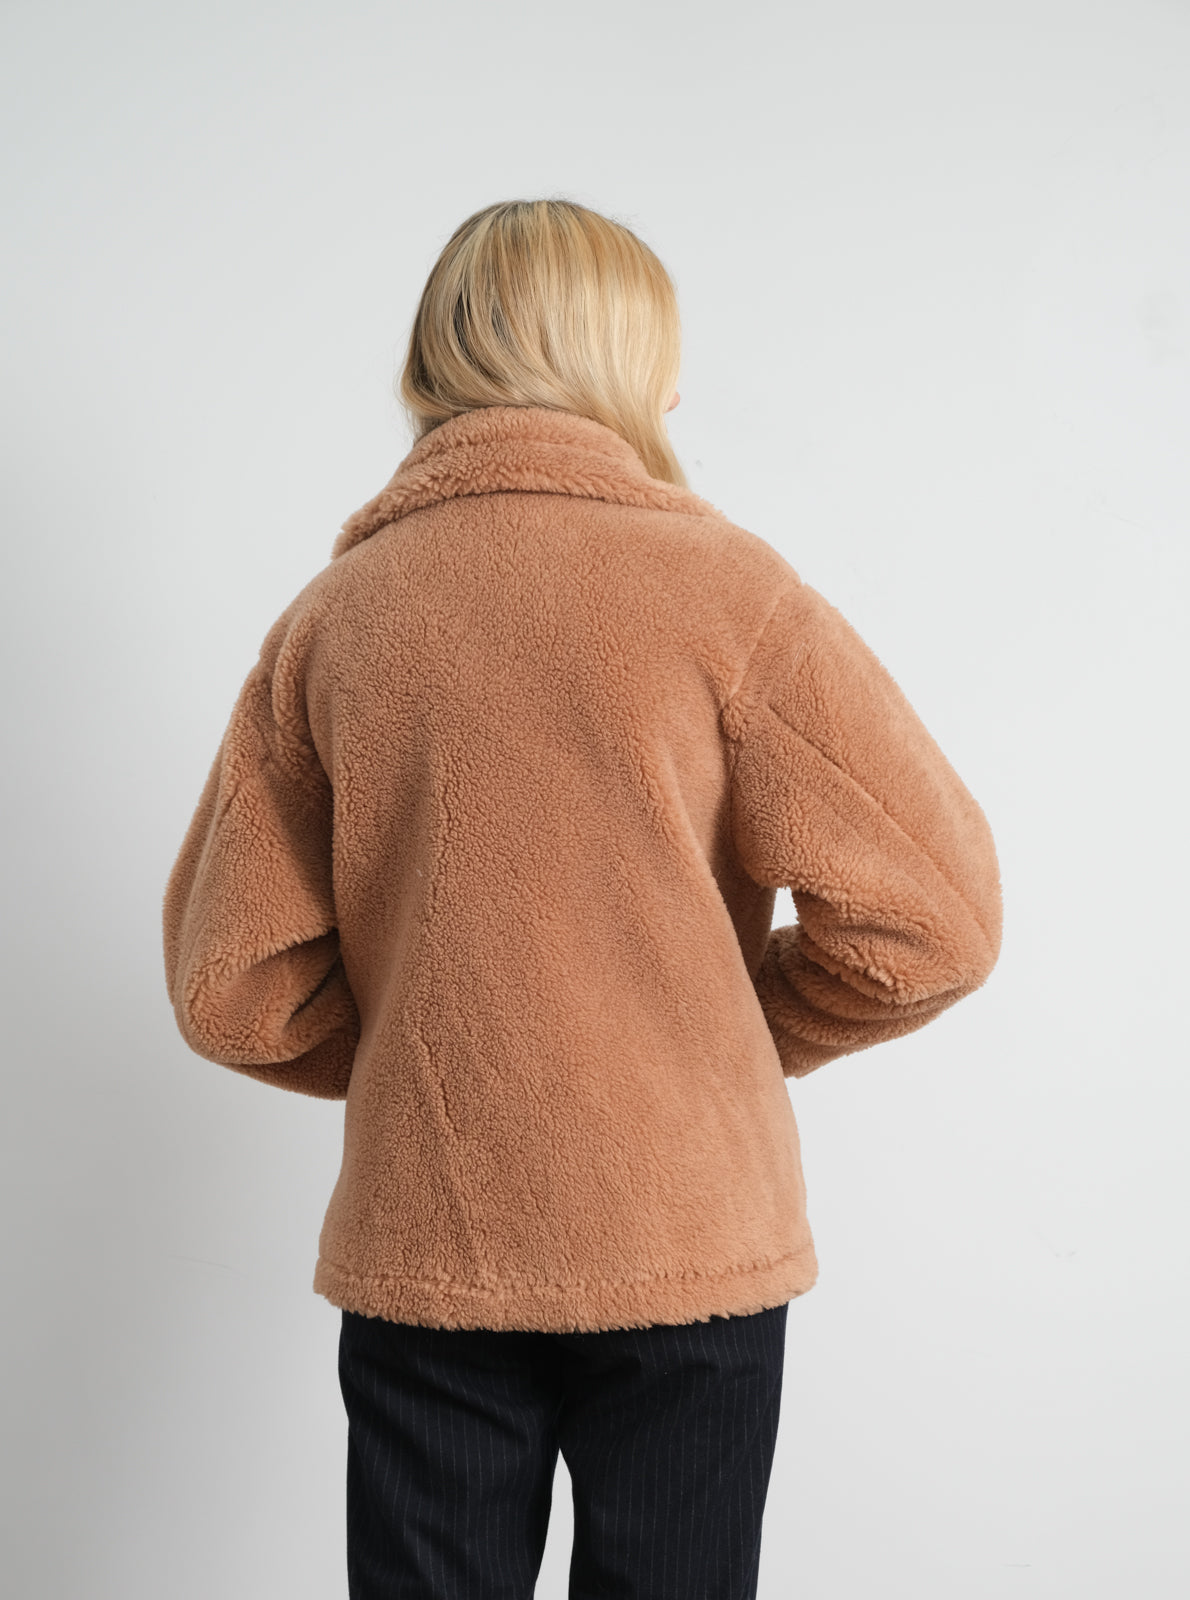 STAND Marina jacket in sand